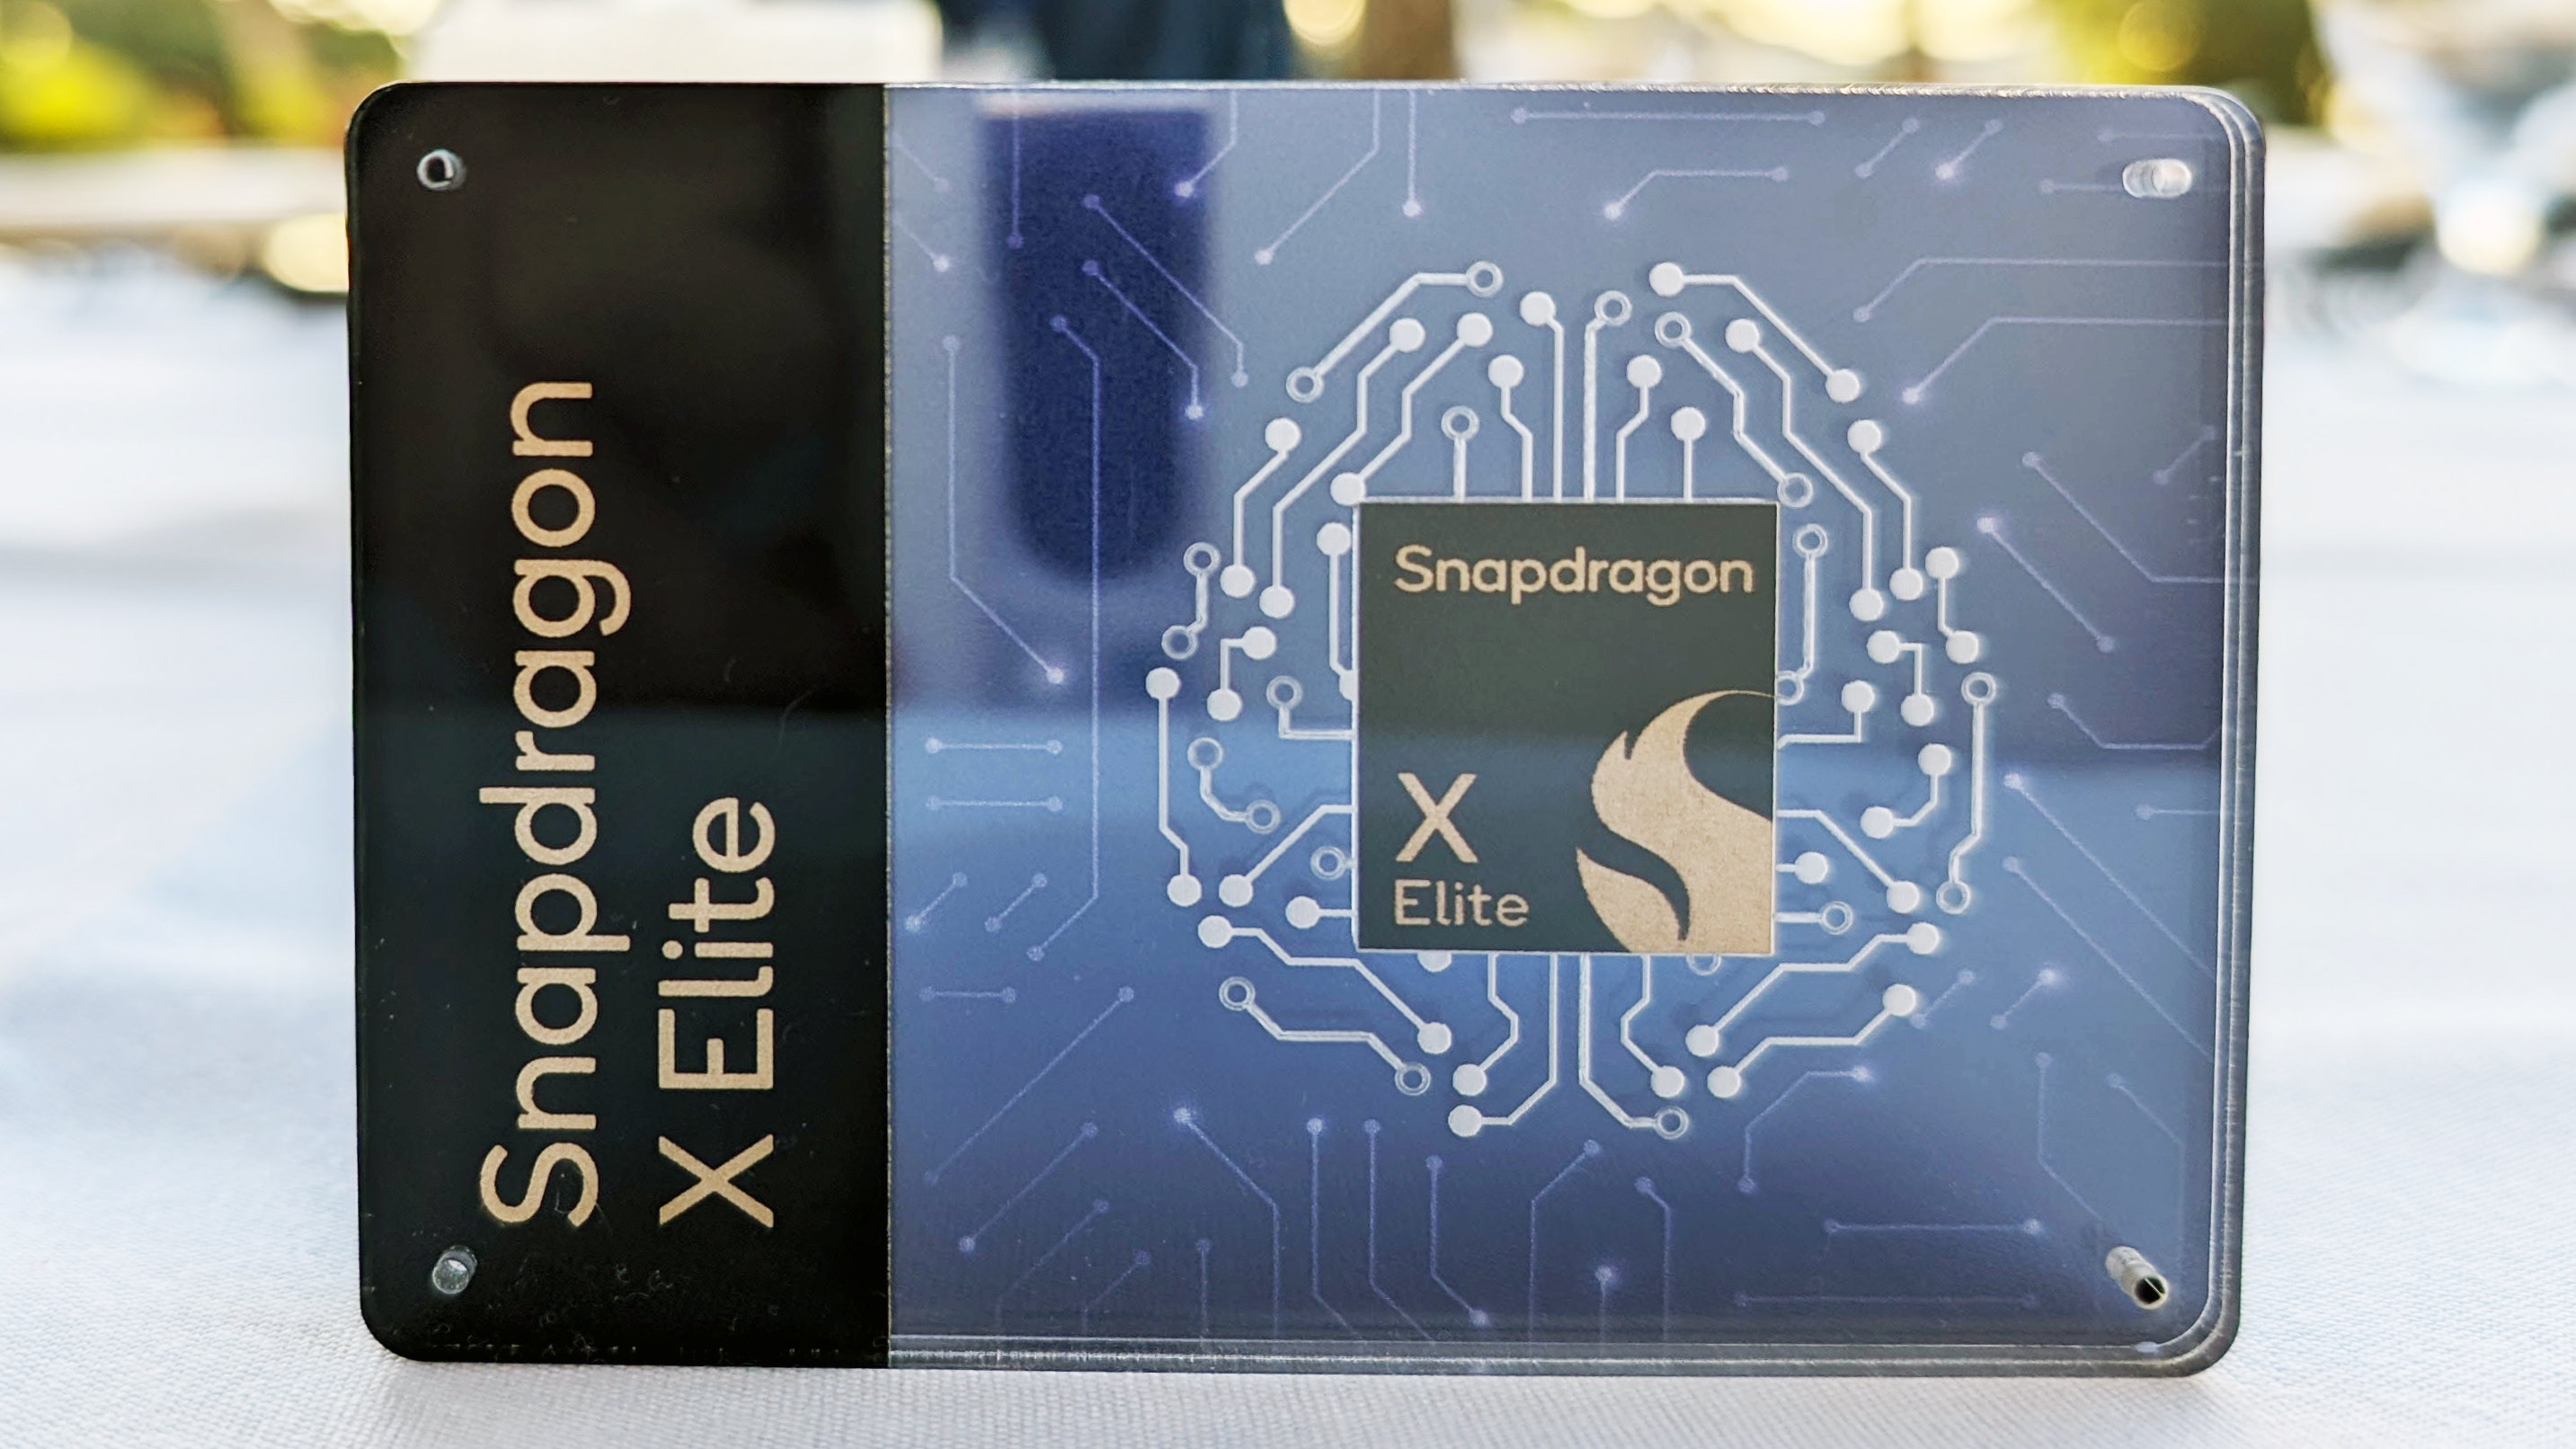 snapdragon-x-elite-cpu-has-been-put-through-its-paces-early-–-and-appears-to-be-every-bit-as-strong-as-qualcomm-claims